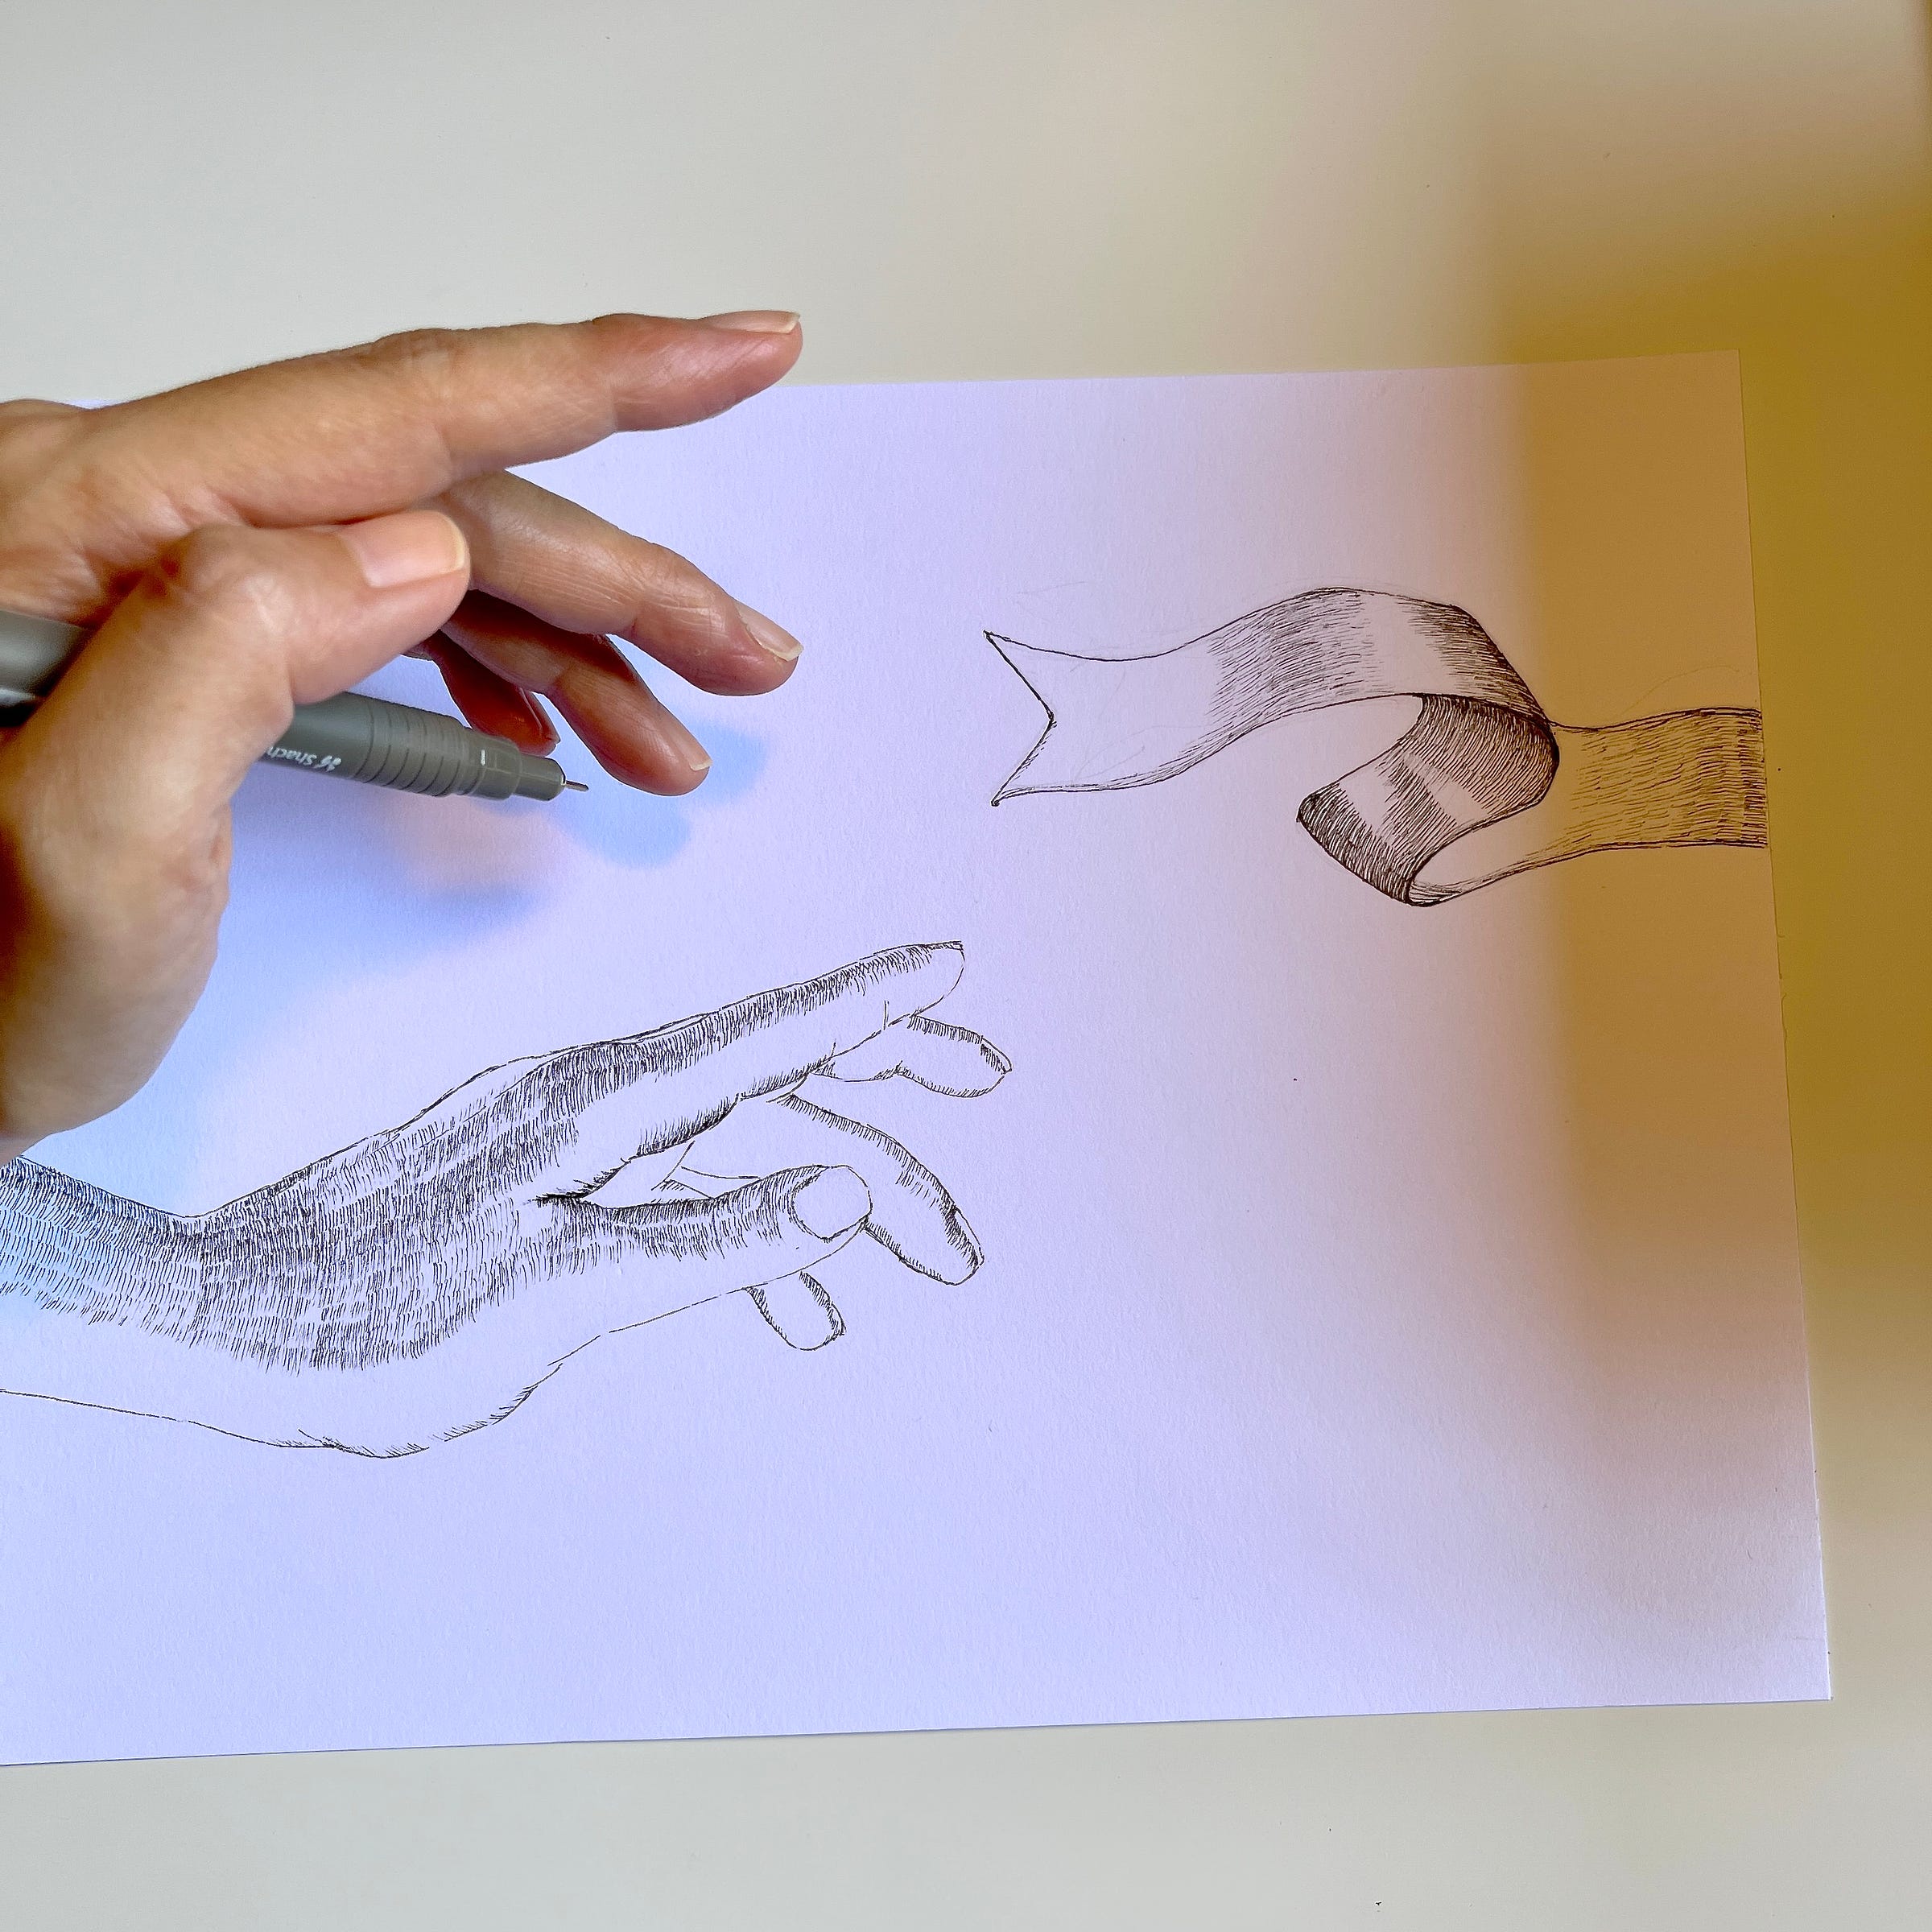 Image: photo of my hand, holding a pen on top of a black & white line drawing. The left side of the drawing shows the hand of a person letting go of something. The gesture of the fingers felt like they are hanging in mid-air, as if the person is hesitant, yet because of love, determined to let go. The right side of the drawing shows part of a ribbon softly flying away, the end of the ribbon facing towards the hand of the person, looking like it’s reaching out to the one releasing it, saying goodbye, yet thankful to be given the chance to fly.